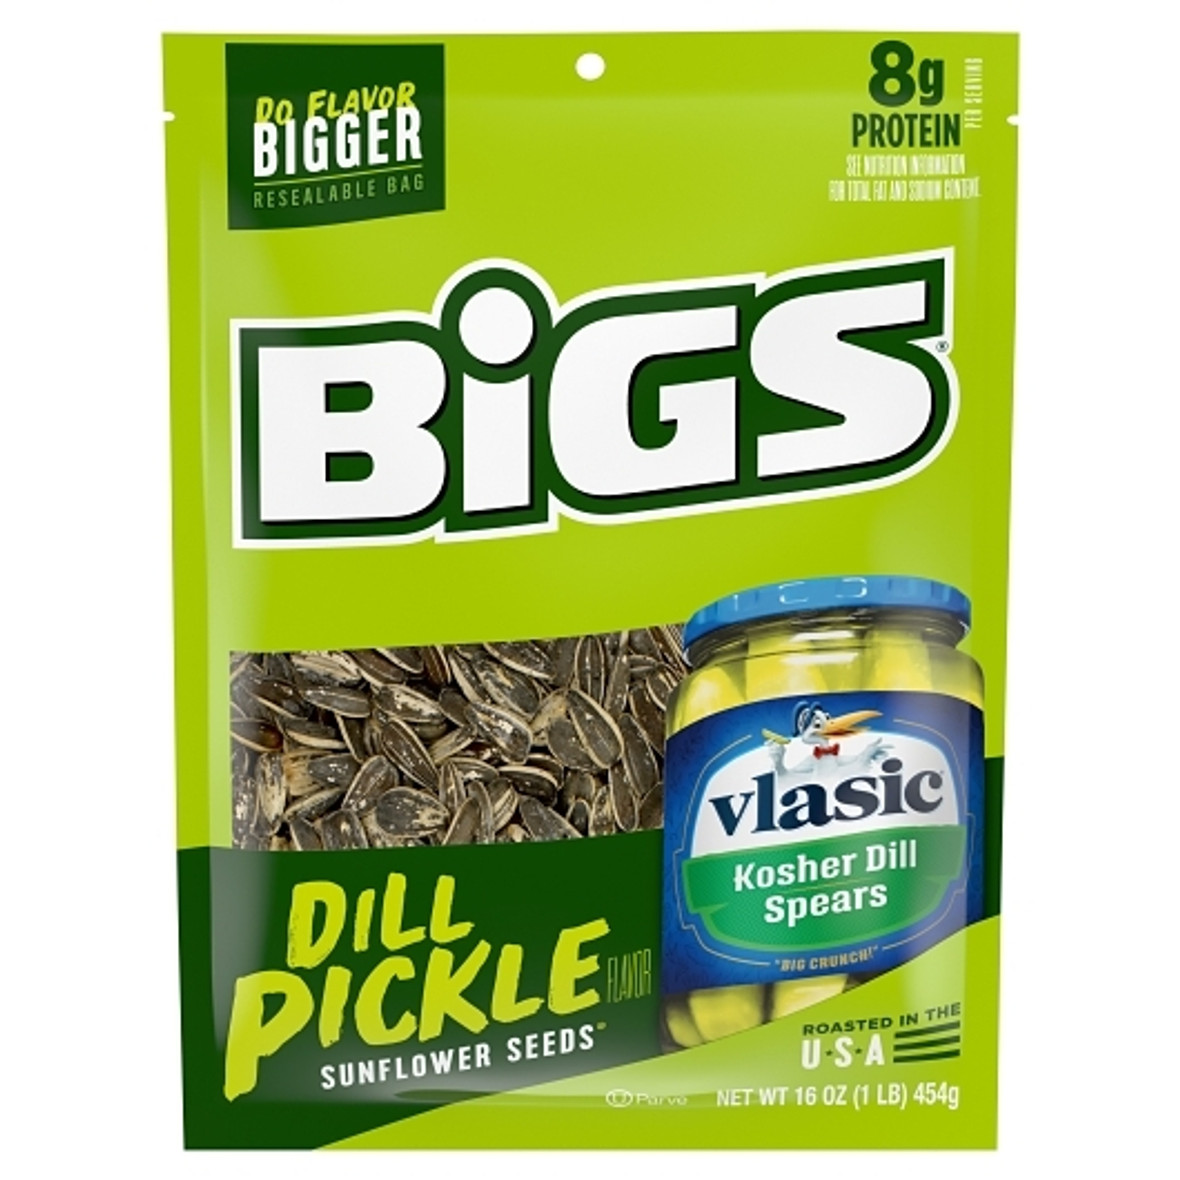 Bigs Dill Pickle Sunflower Seeds, 16 Ounce, 8 Per Case